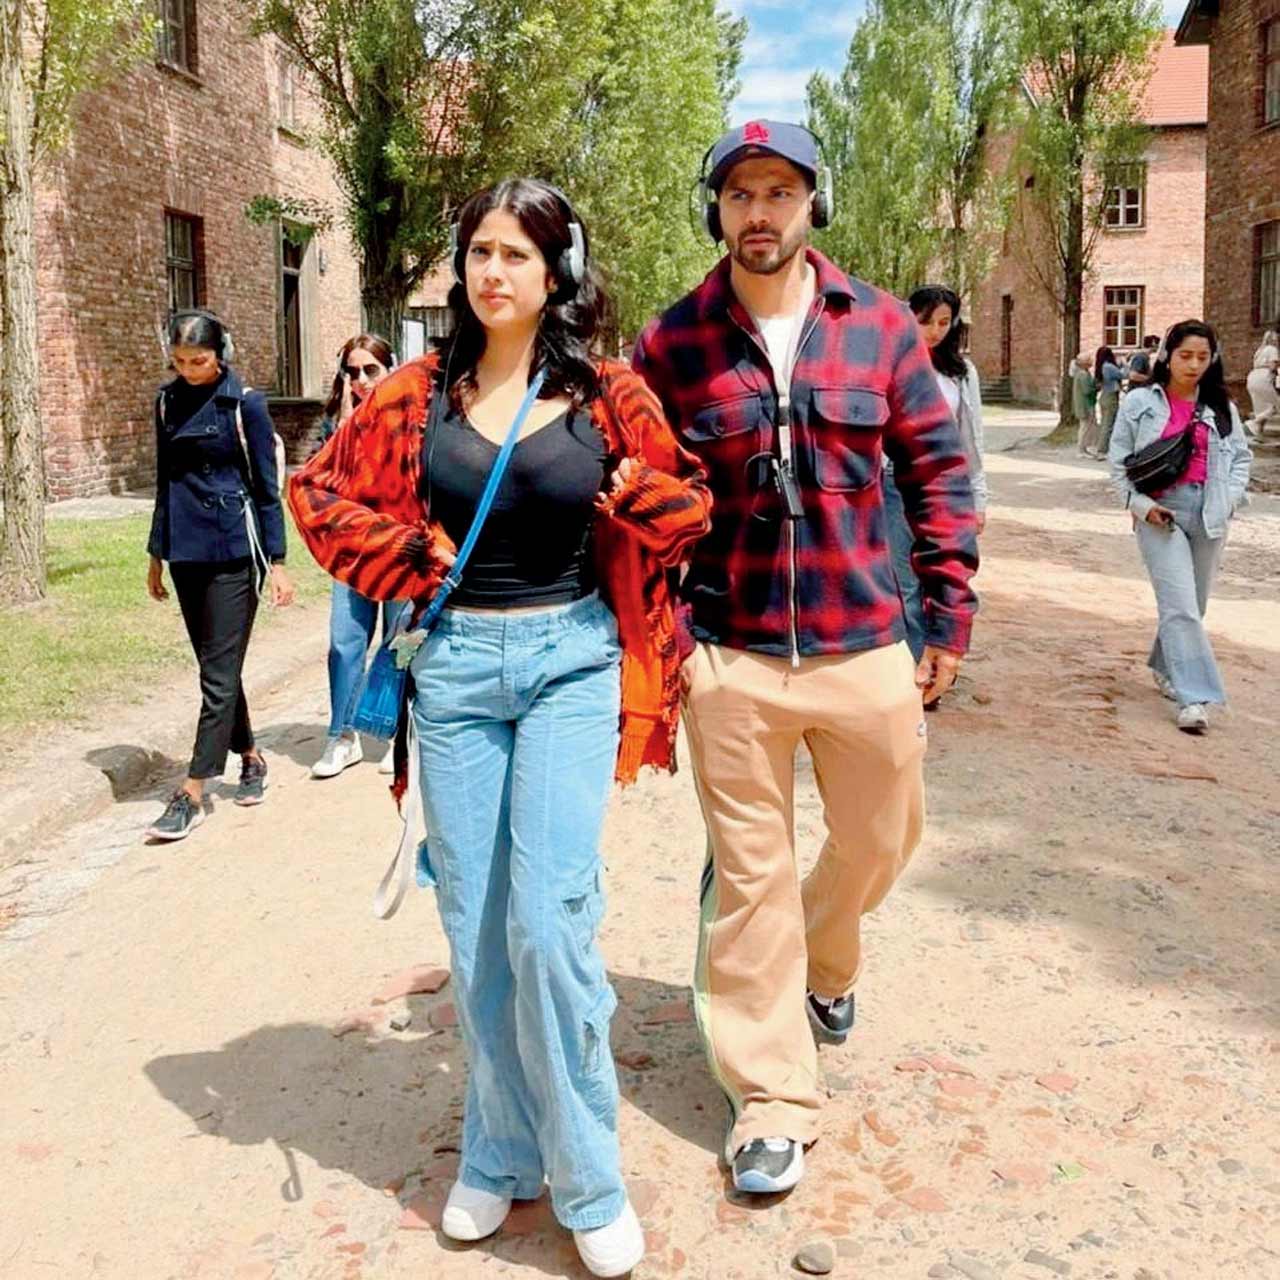 After shooting in Paris and Amsterdam, Varun Dhawan and Janhvi Kapoor are currently in Poland for the last leg of the European schedule of 'Bawaal'. The two actors visited the Auschwitz concentration camp that was operated by Nazi Germany in occupied Poland during World War II. Like most tourists visiting the landmark spot, the duo also underwent a quick lesson about the history of the place. Apparently, the Nazi camp sequences form crucial part of director Nitesh Tiwari’s narrative